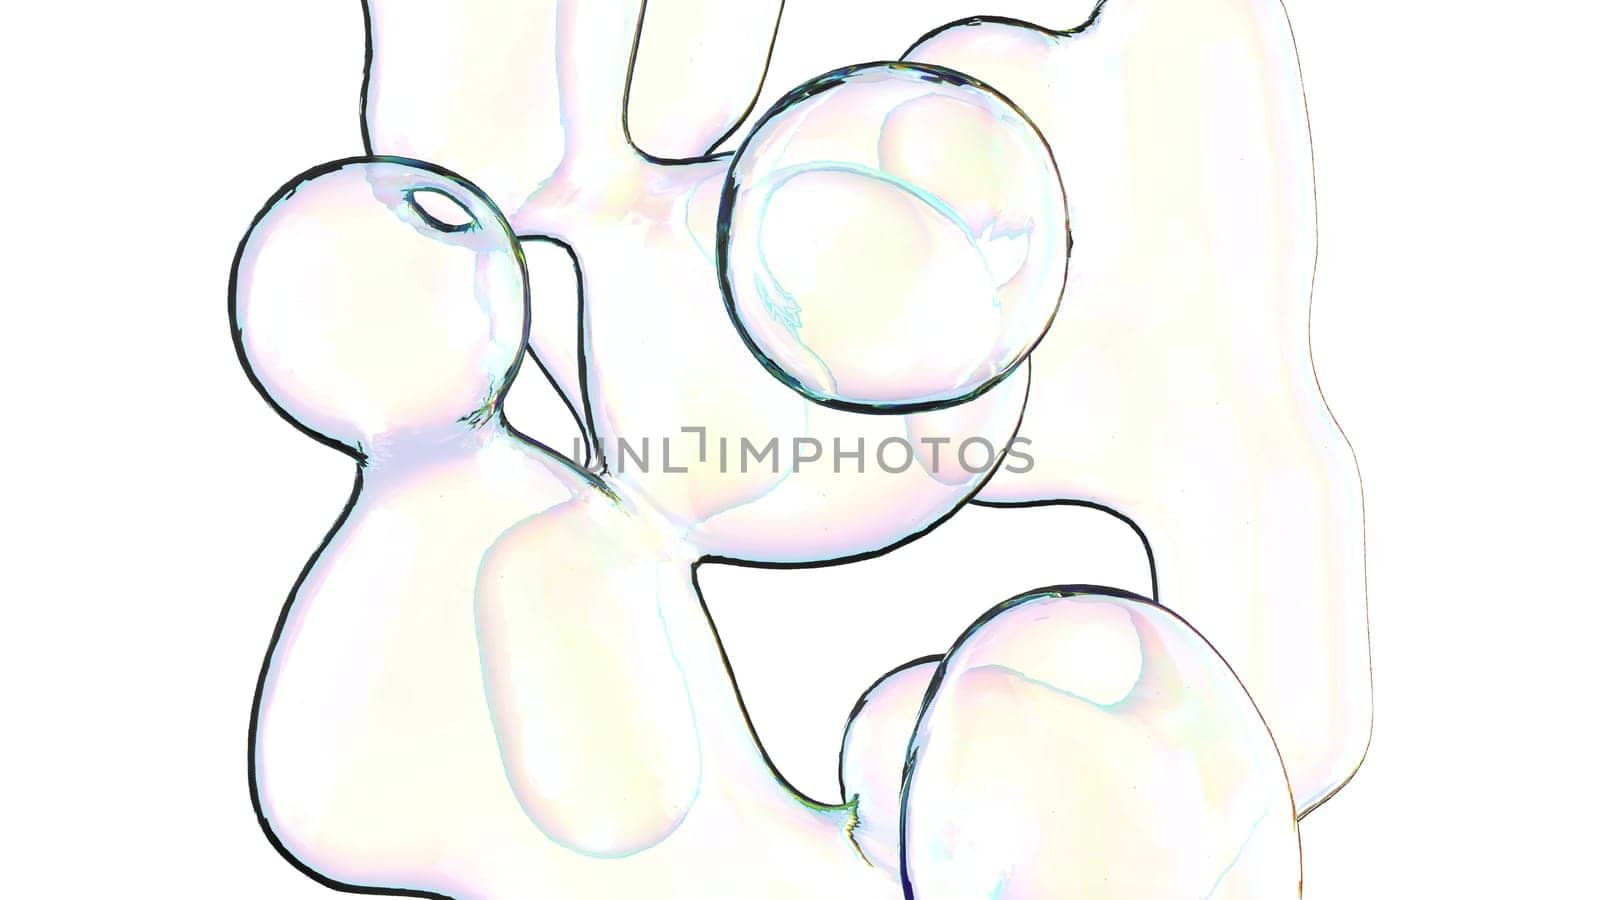 Metaball 3d multicolored background Liquid white shape 3d render by Zozulinskyi